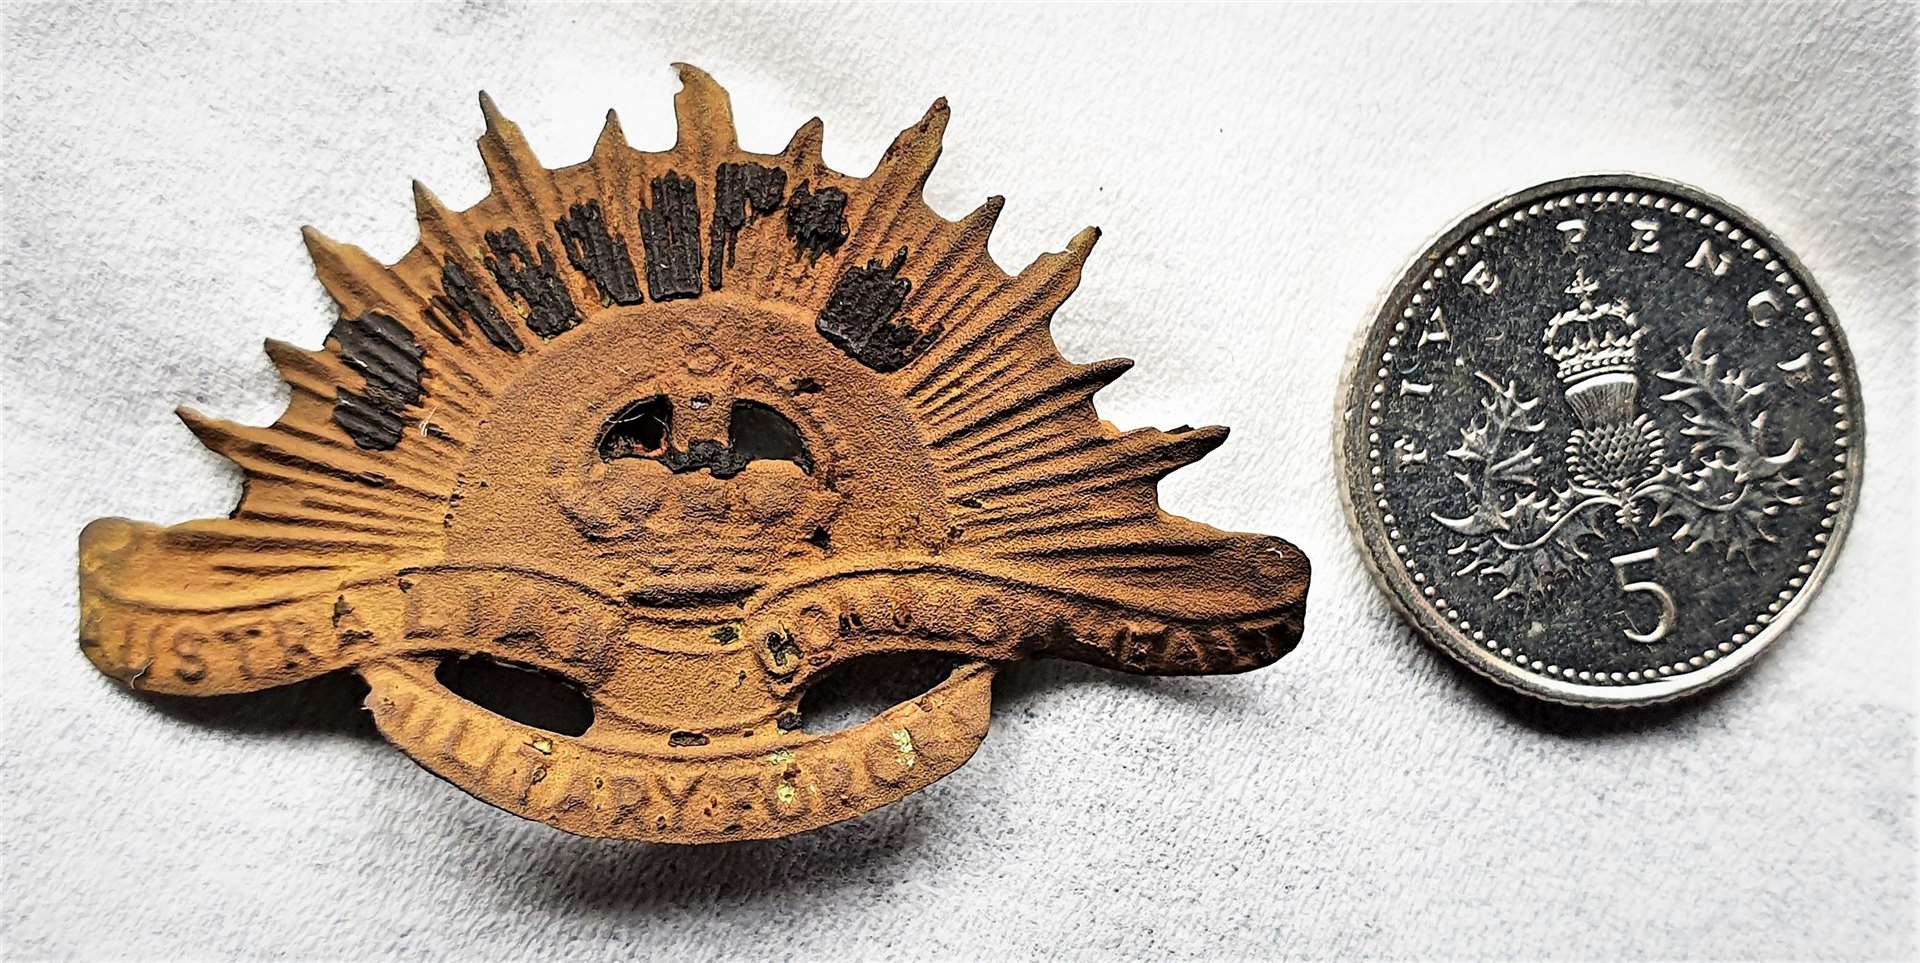 The Australian Rising Sun badge that Chris found with a 5p coin for size comparison. Picture: Chris Aitken